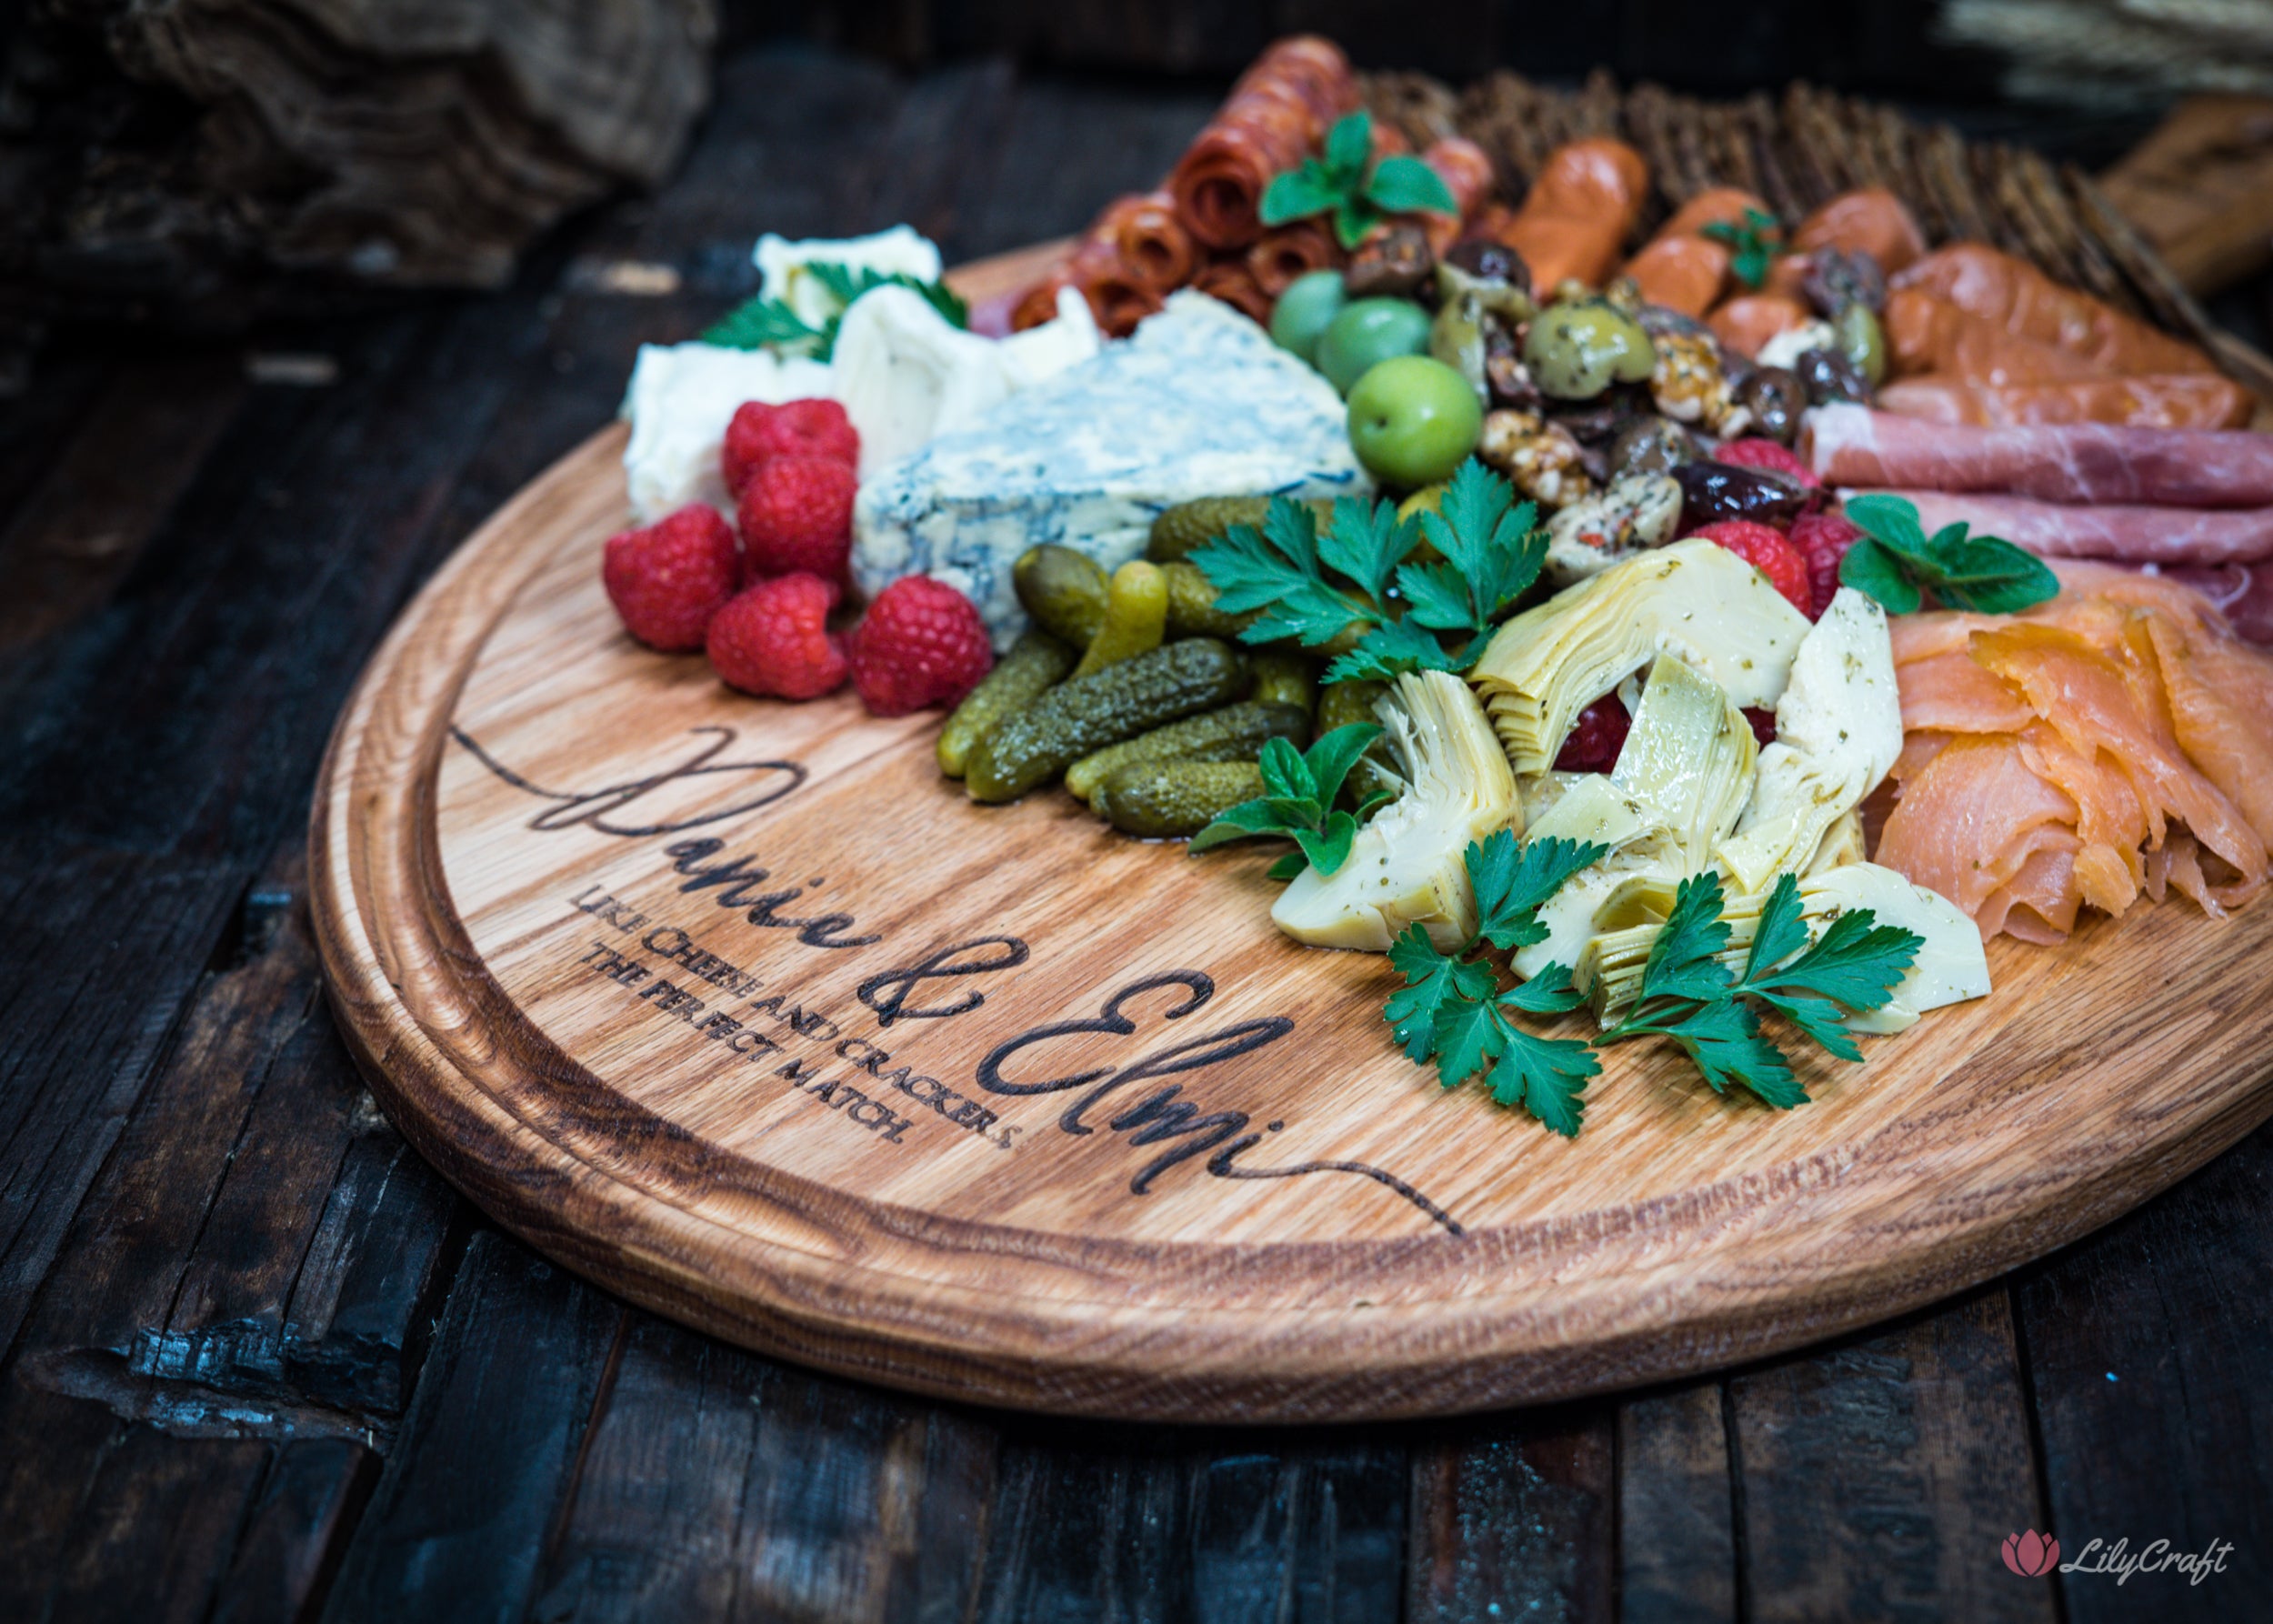 Handcrafted with care, our custom-engraved cheese board adds a personal touch to your entertaining collection.